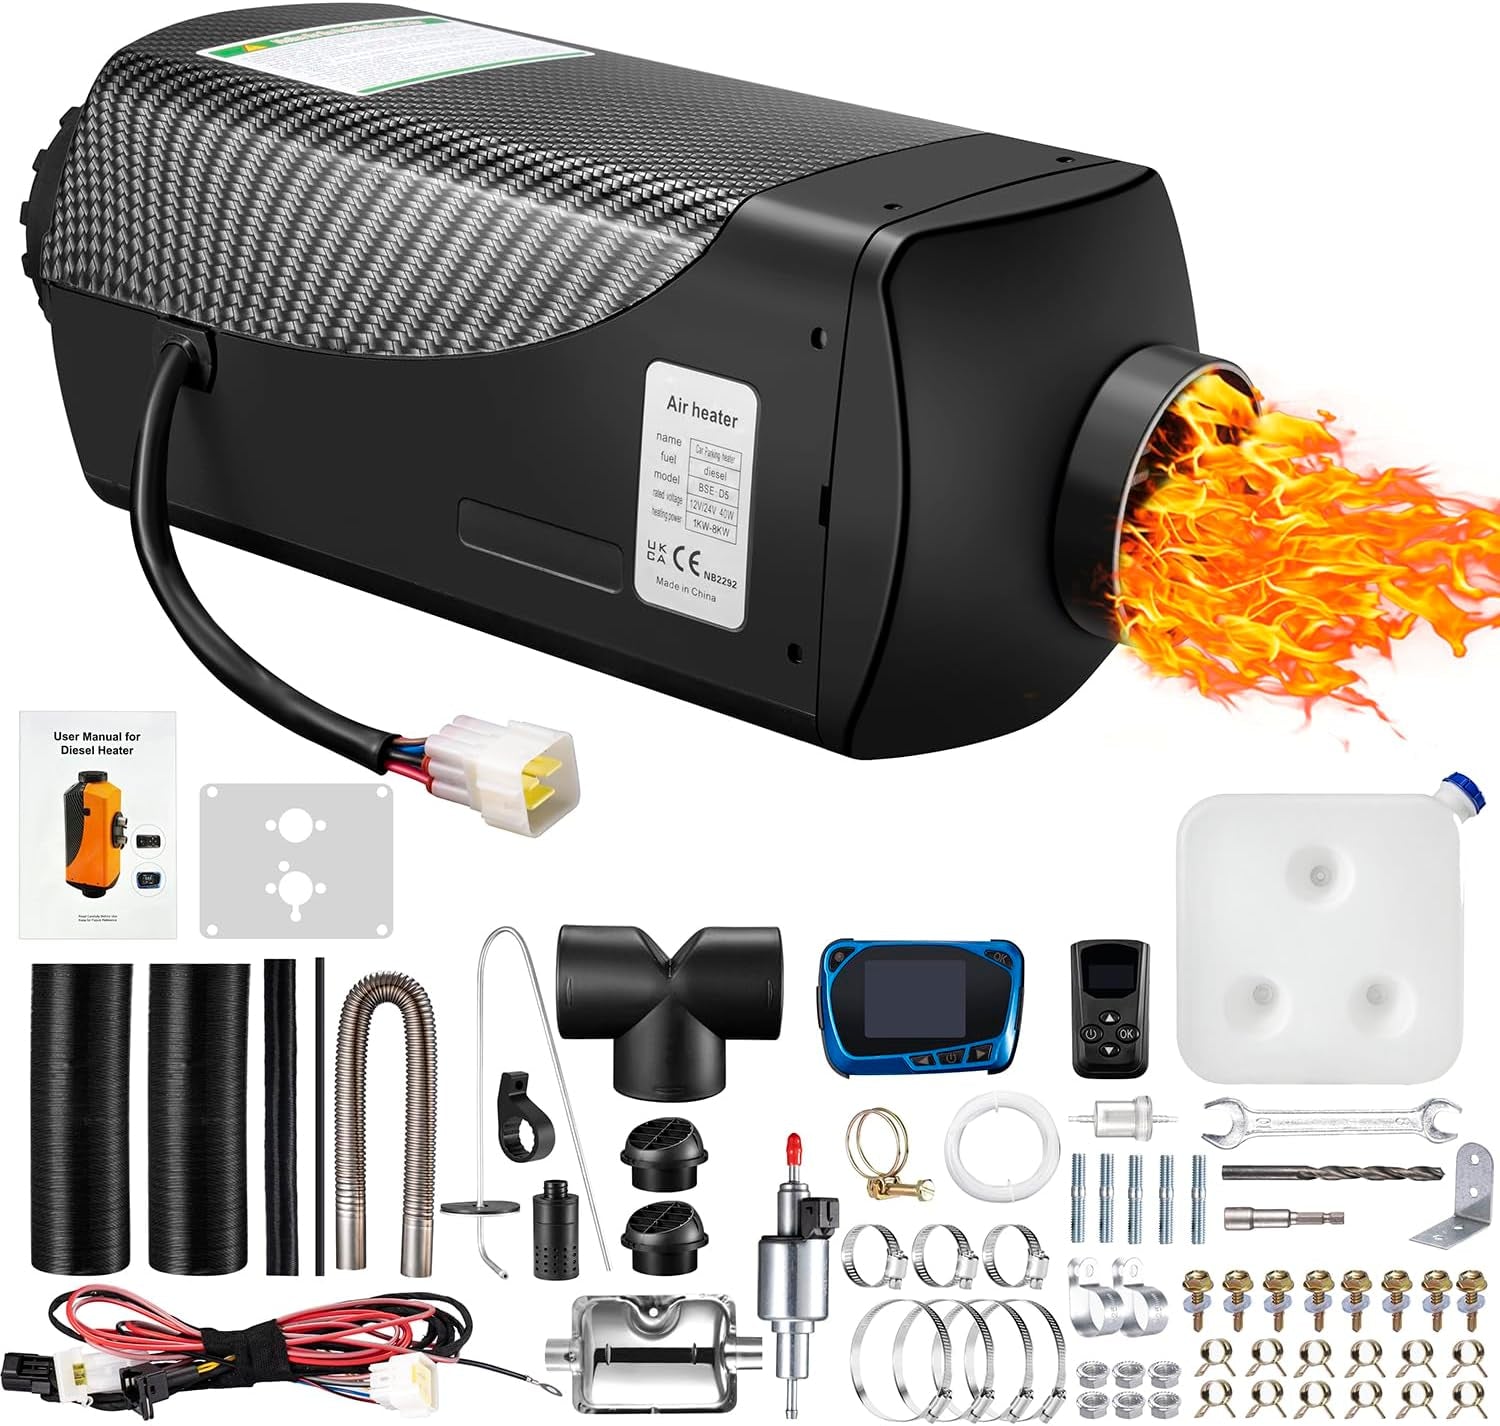 Diesel Heater 2KW/5KW/8KW 12V-24V Upraded Diesel Air Heater, Low Fuel  Consumption, Fast Heating Defrost Defog for Campers, Truck, Trailer, RV,  Boat